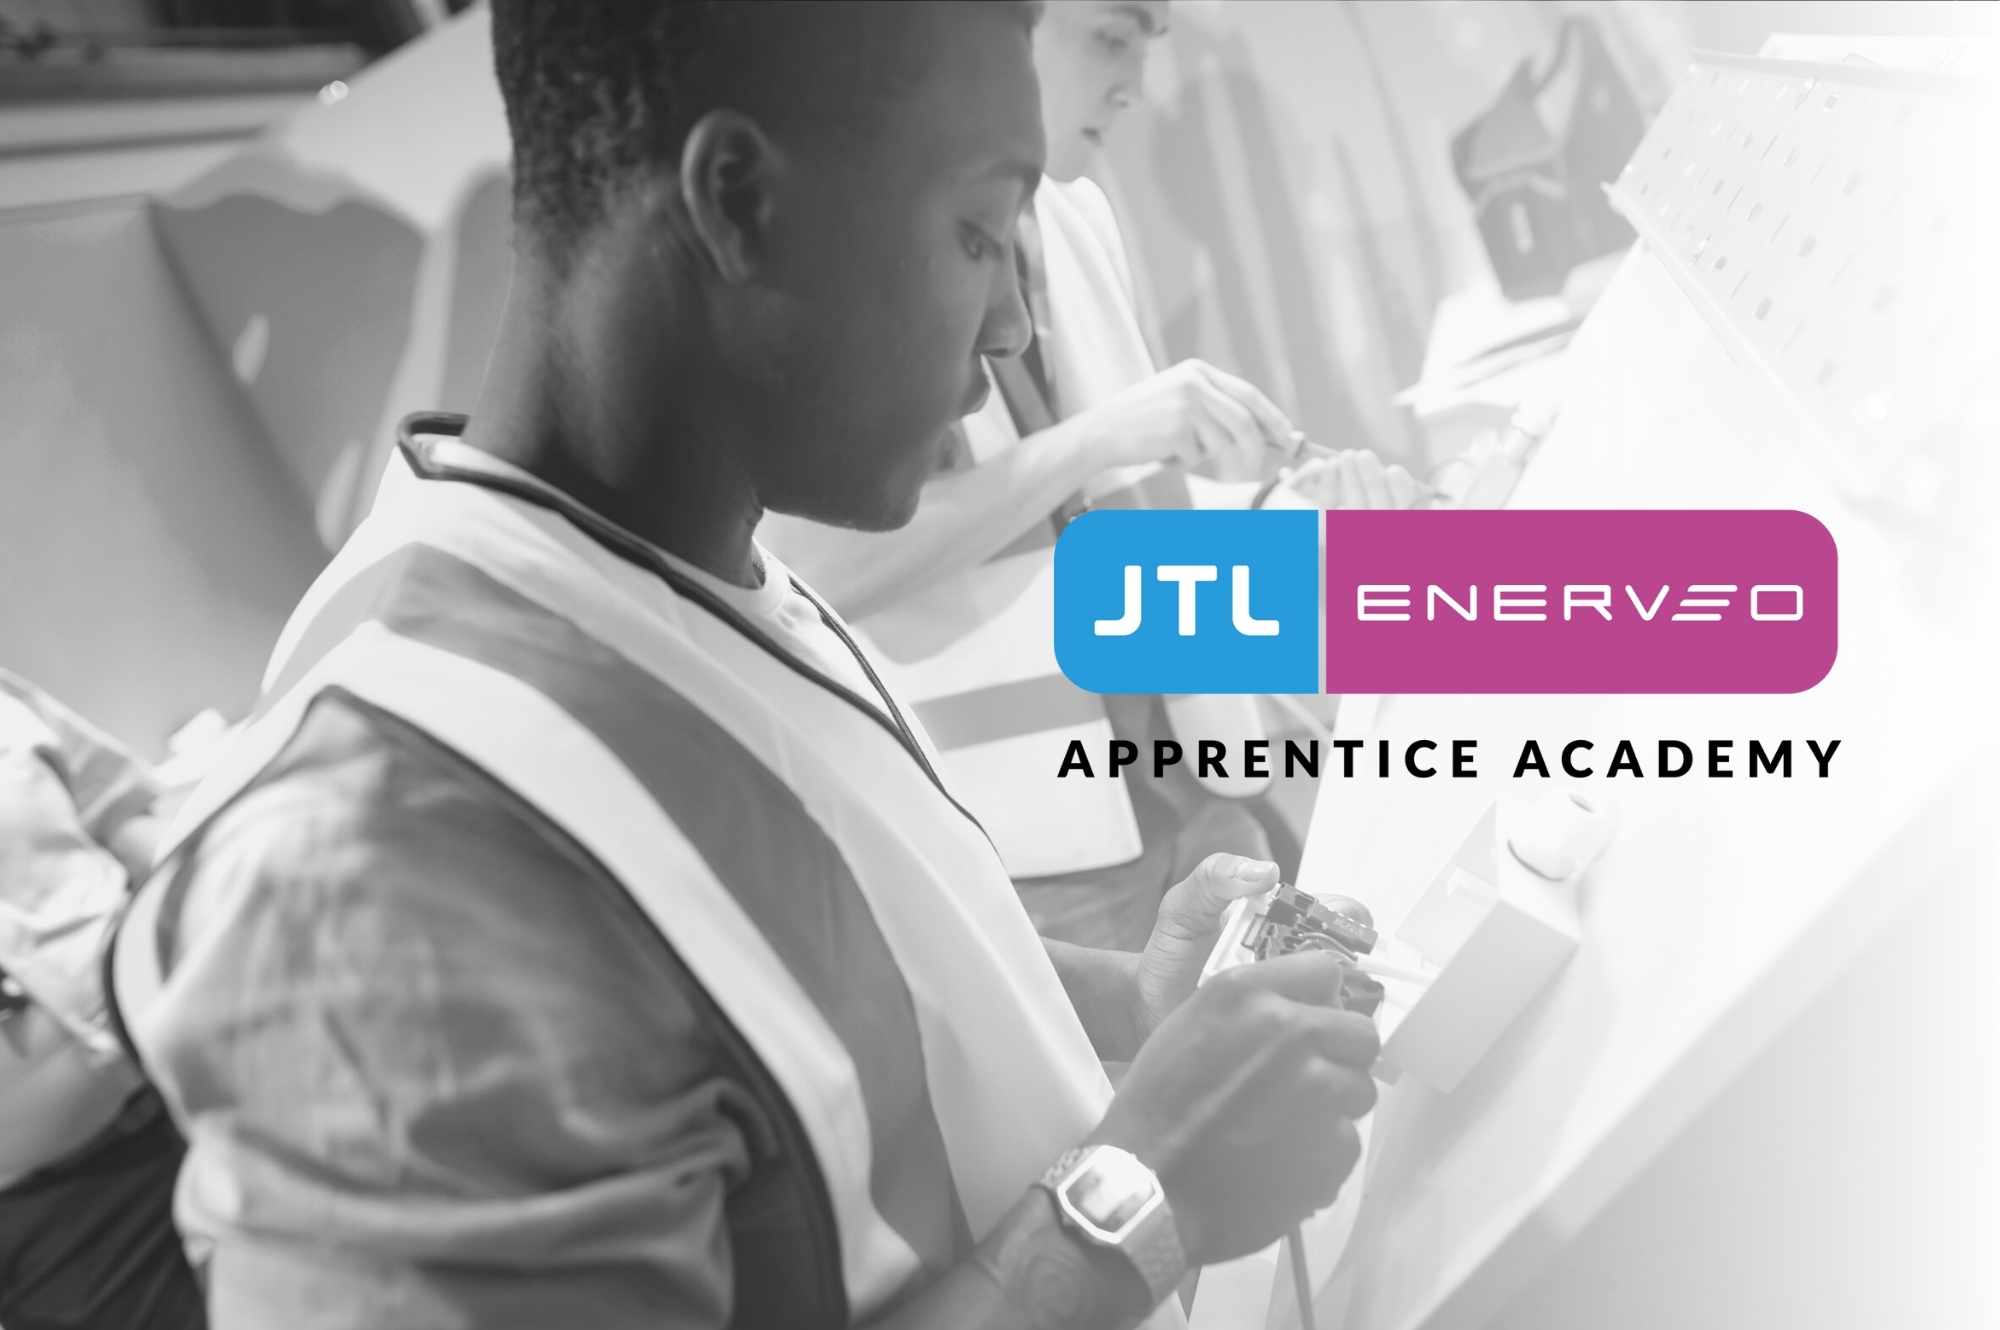 JTL launches first apprenticeship academy in partnership with Enerveo